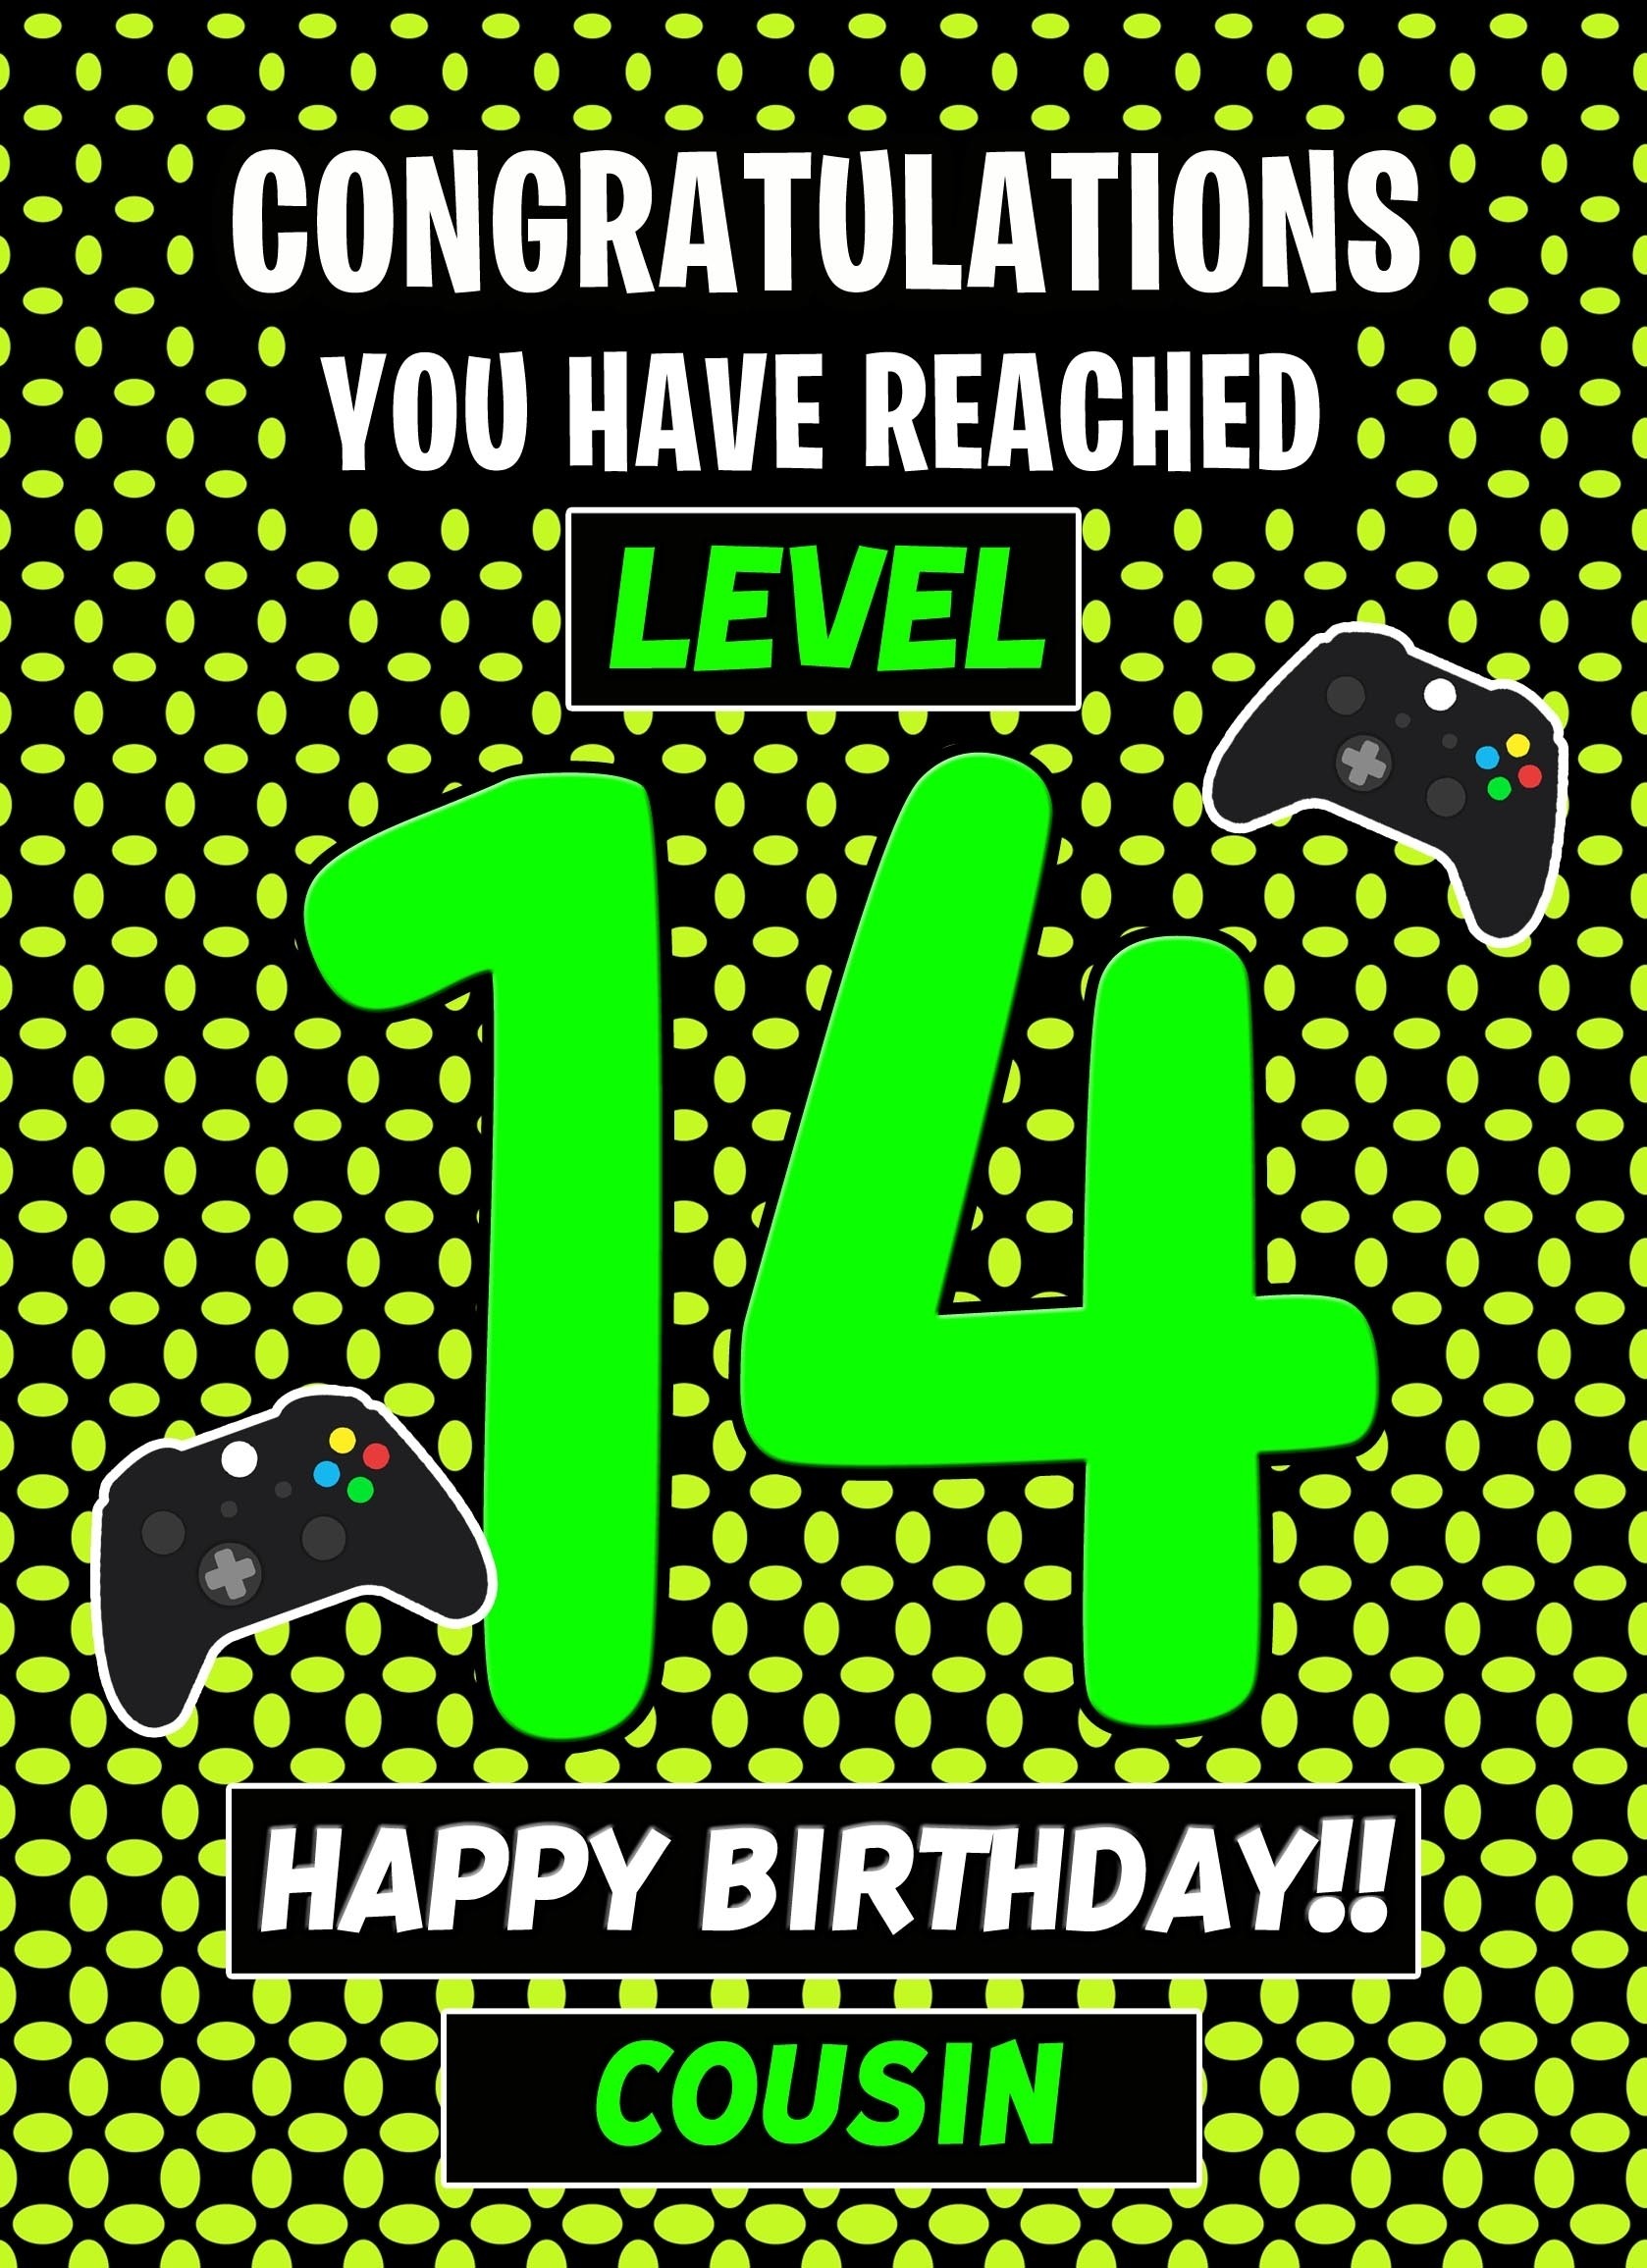 Cousin 14th Birthday Card (Level Up Gamer)